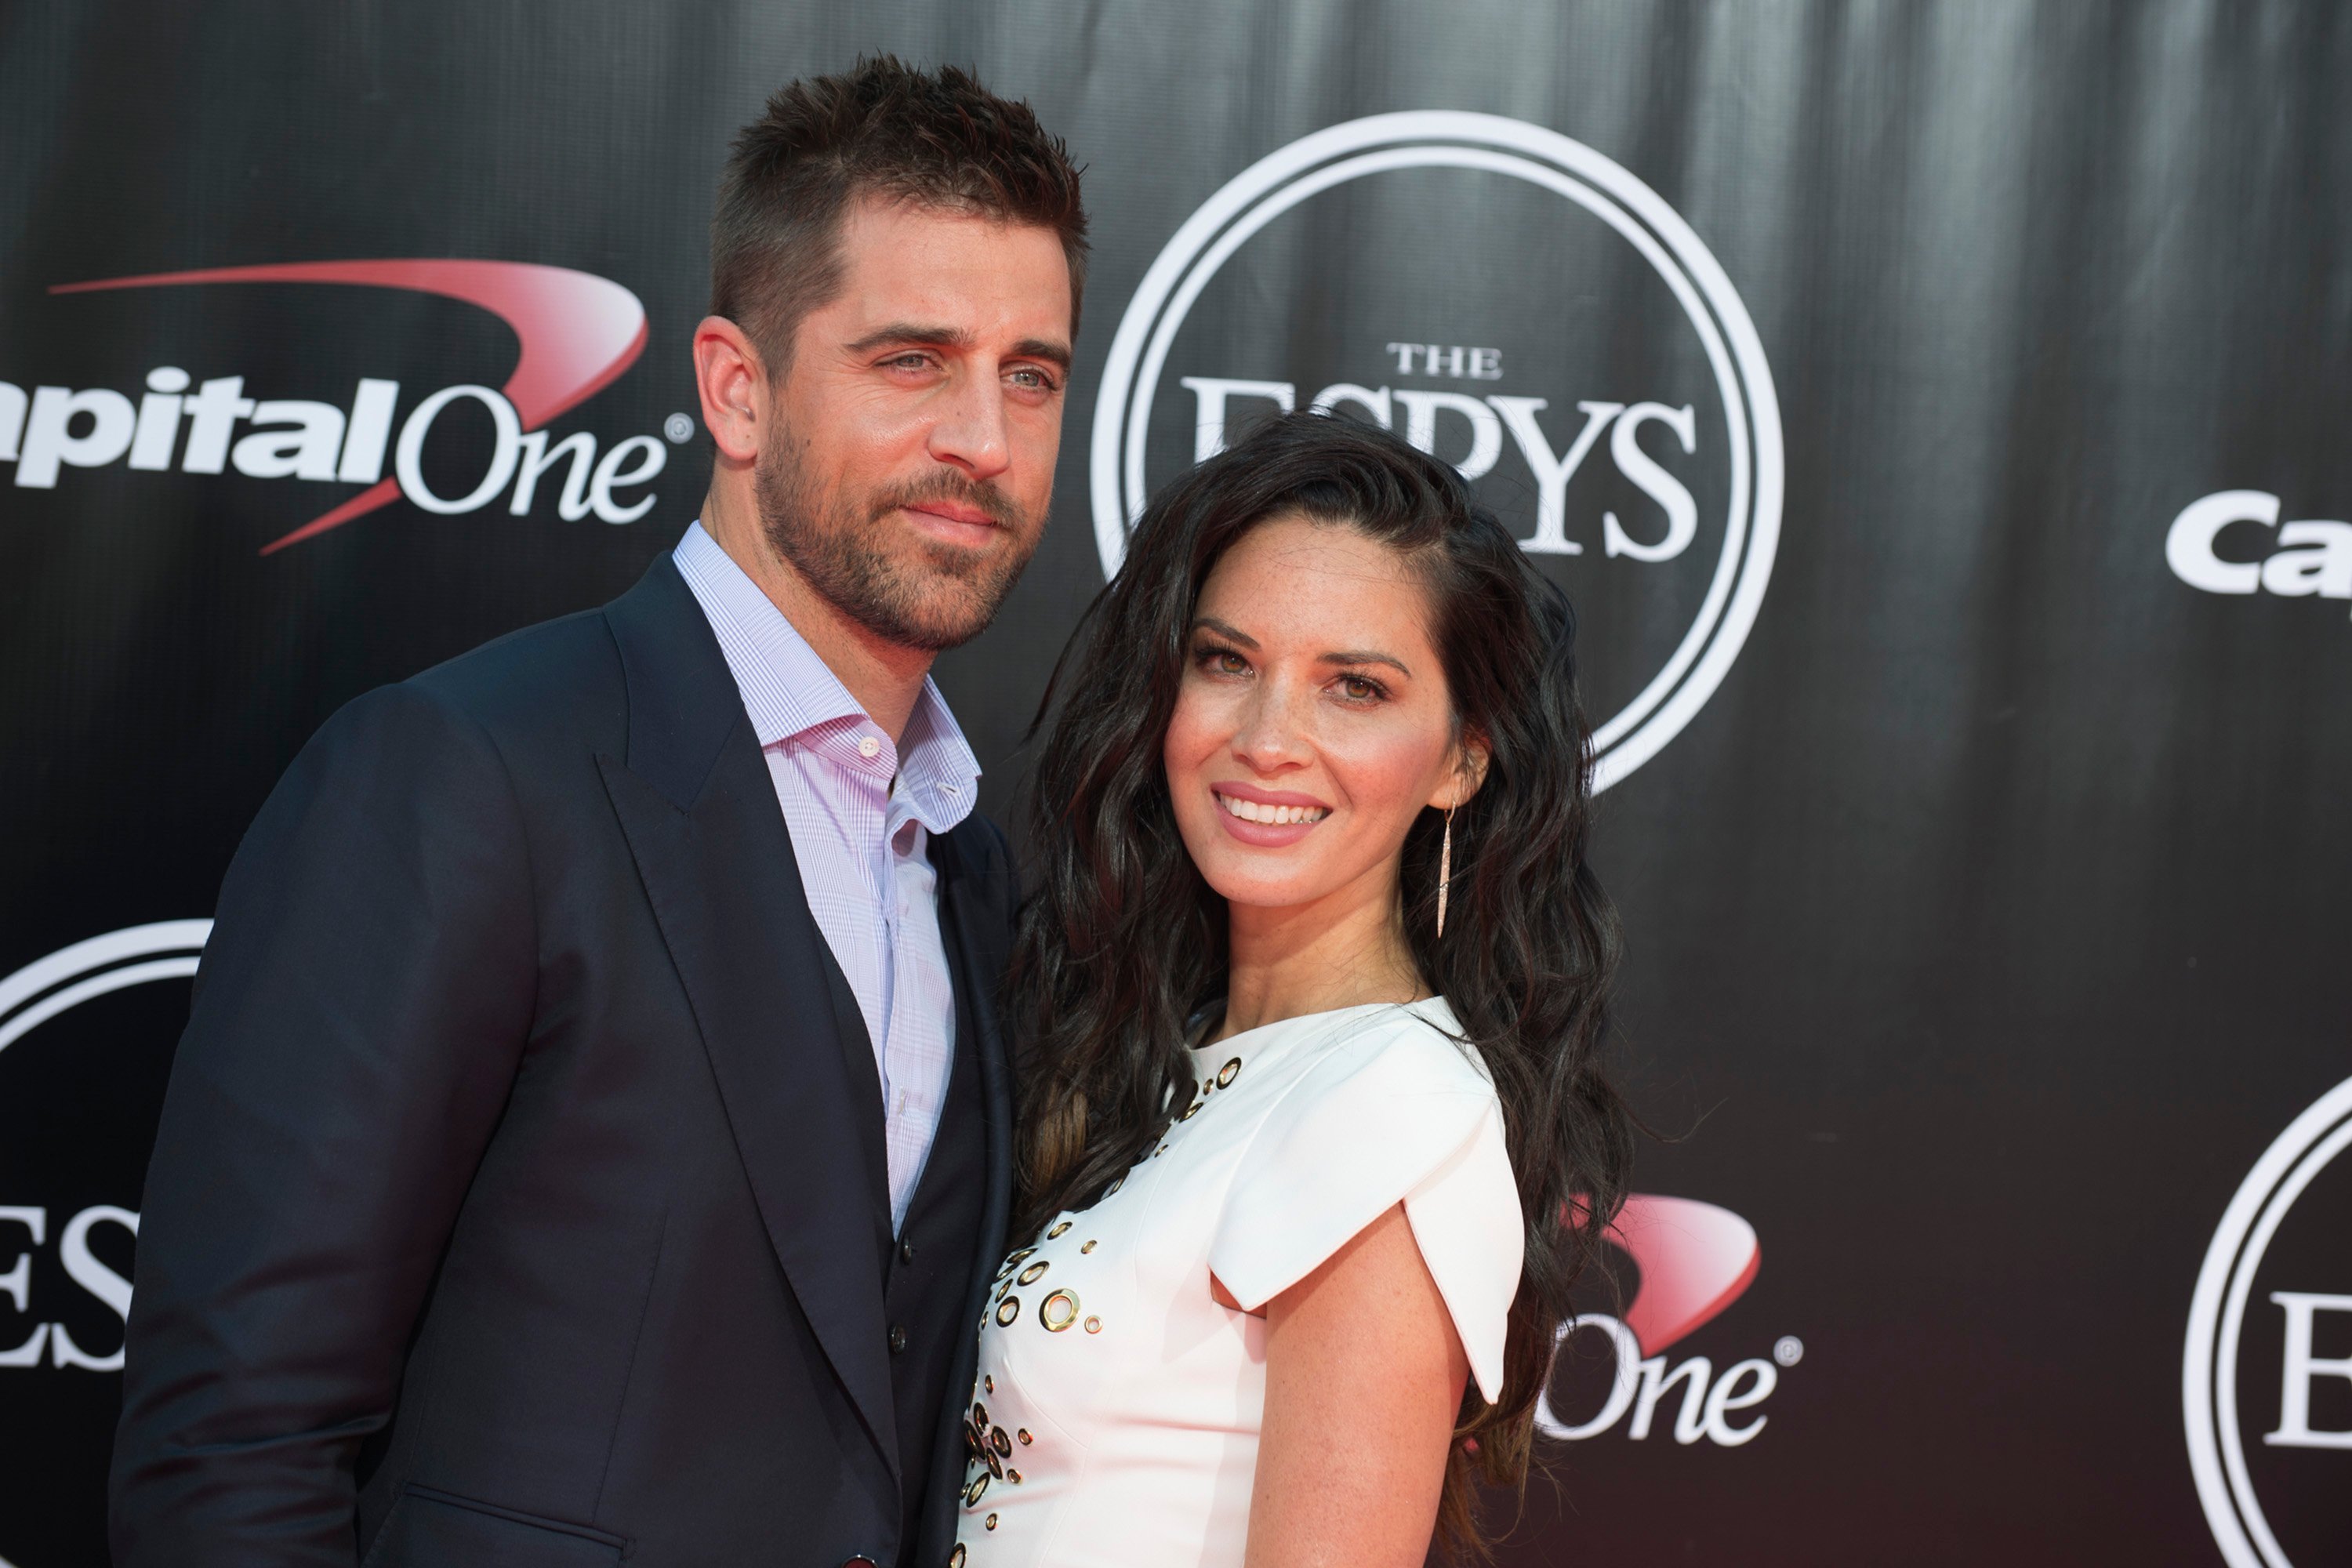 Aaron Rodgers and Olivia Munn posing together on the red carpet at the 2016 ESPYS